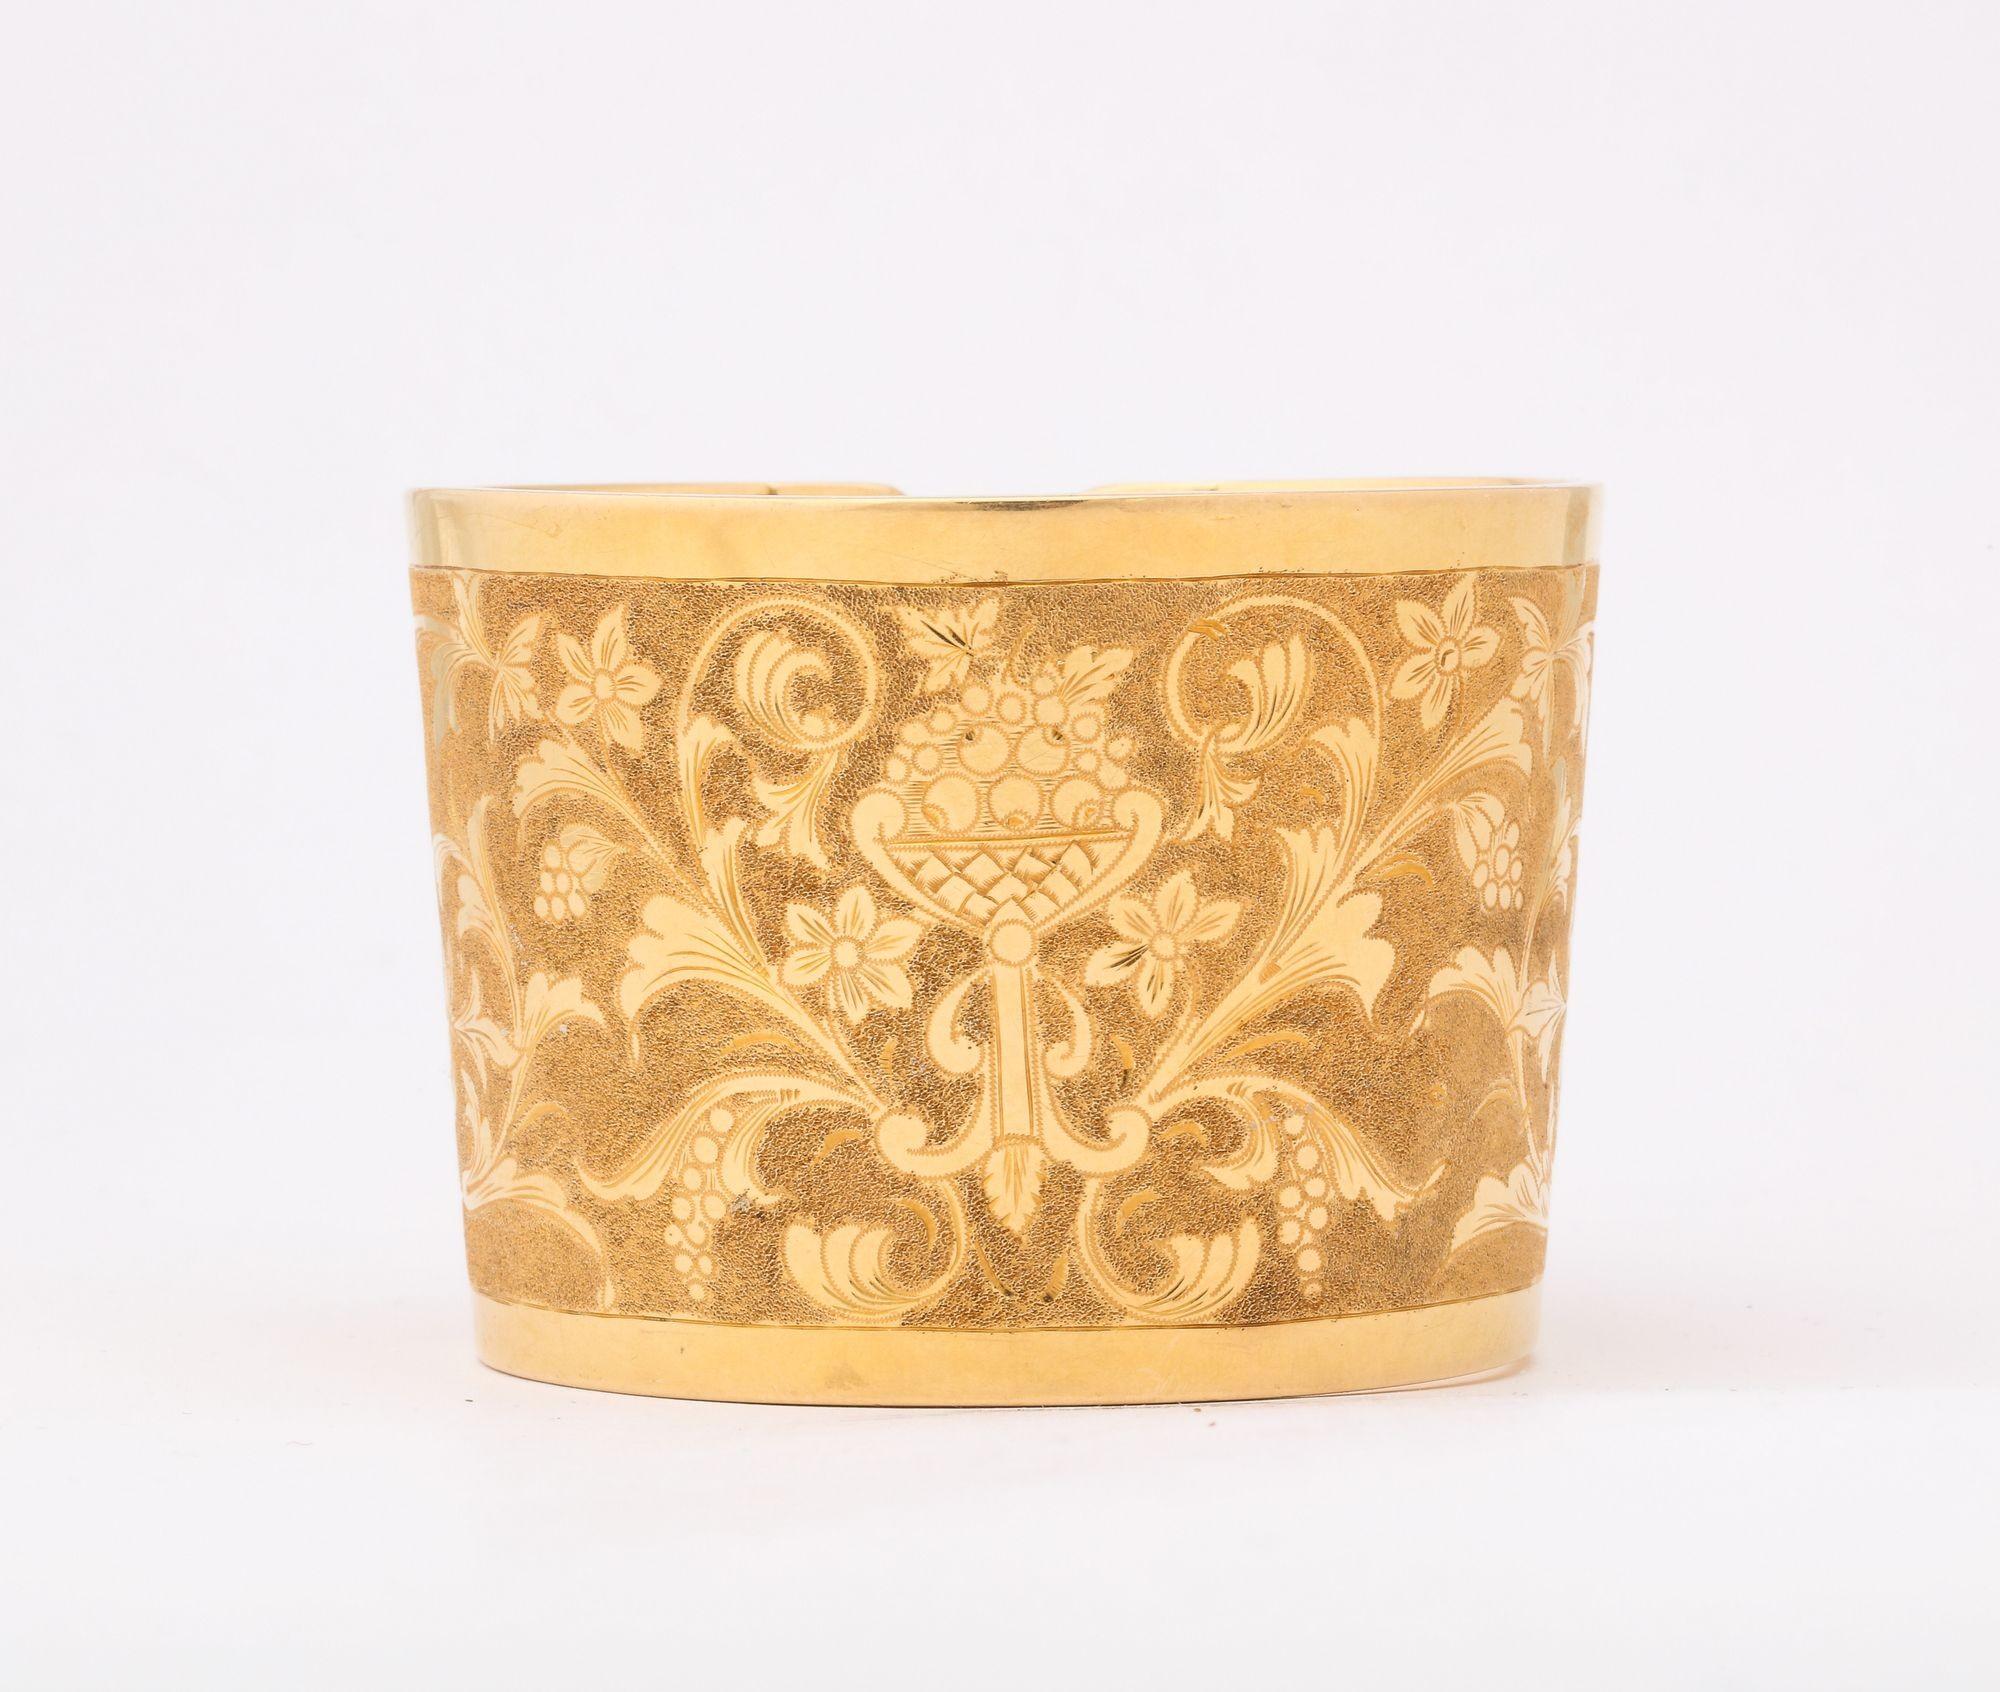 Italian Classical  Engraved Cuff With Two Tone Gold For Sale 2